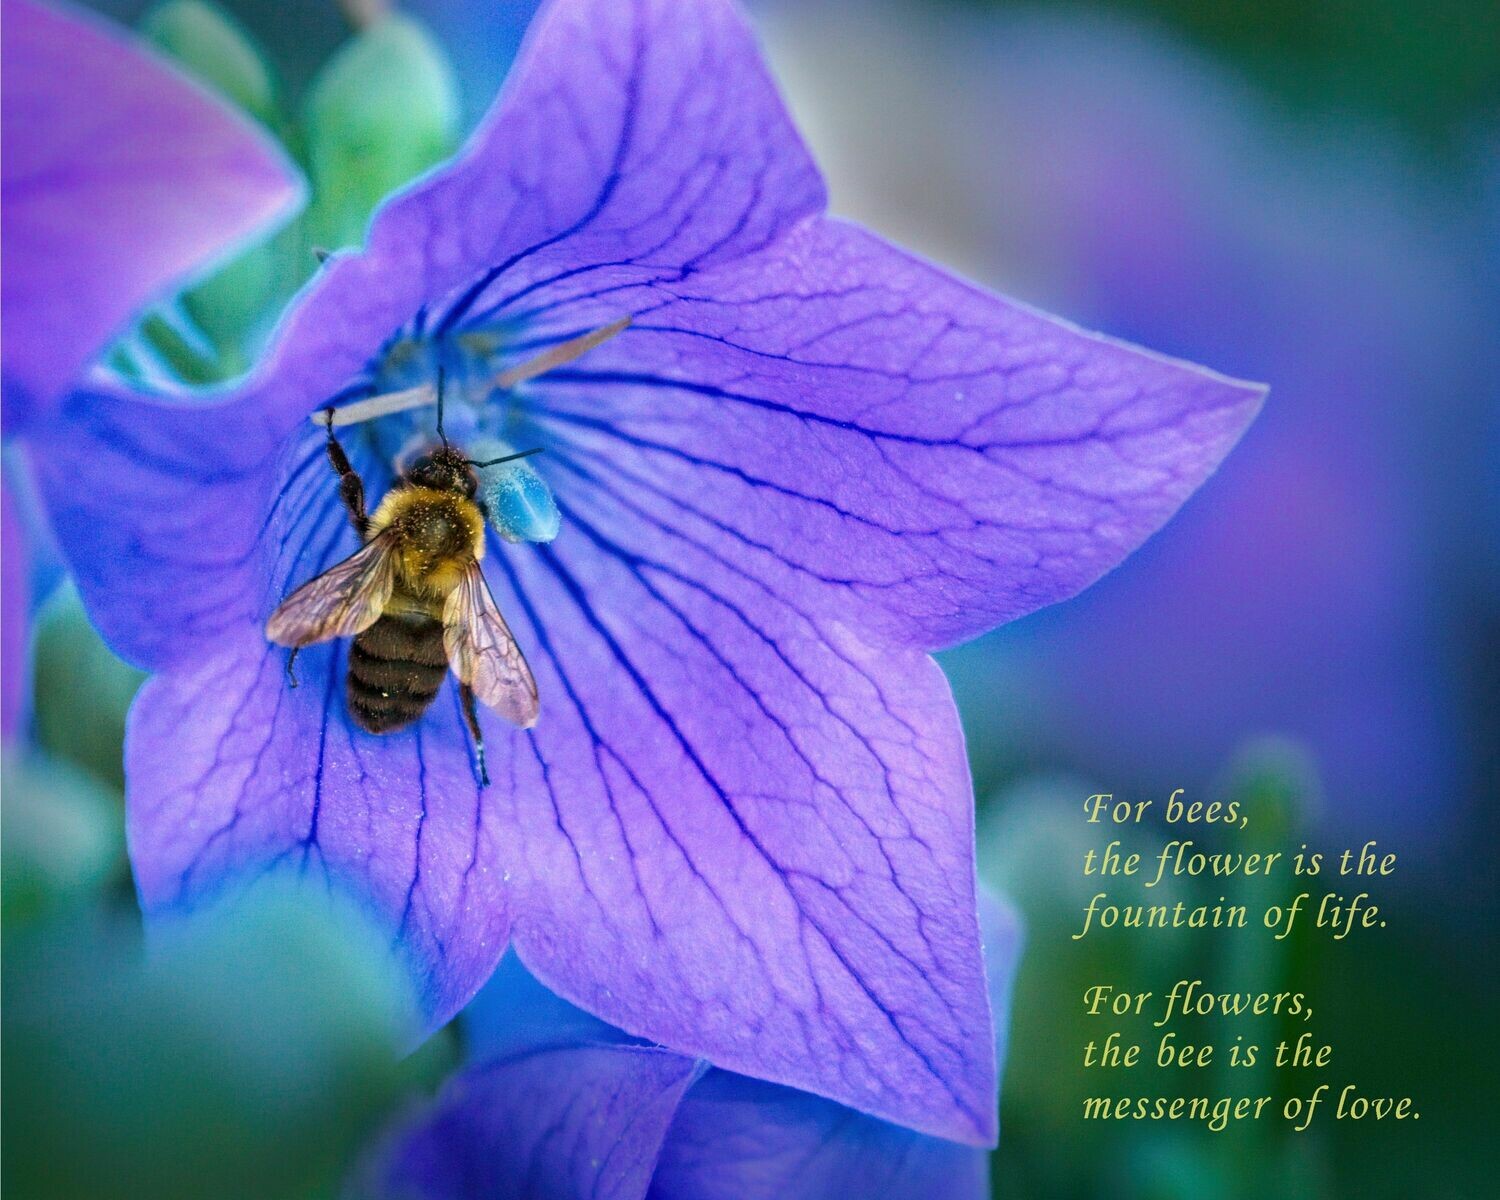 The Flower & the Bee 8x10 Photo